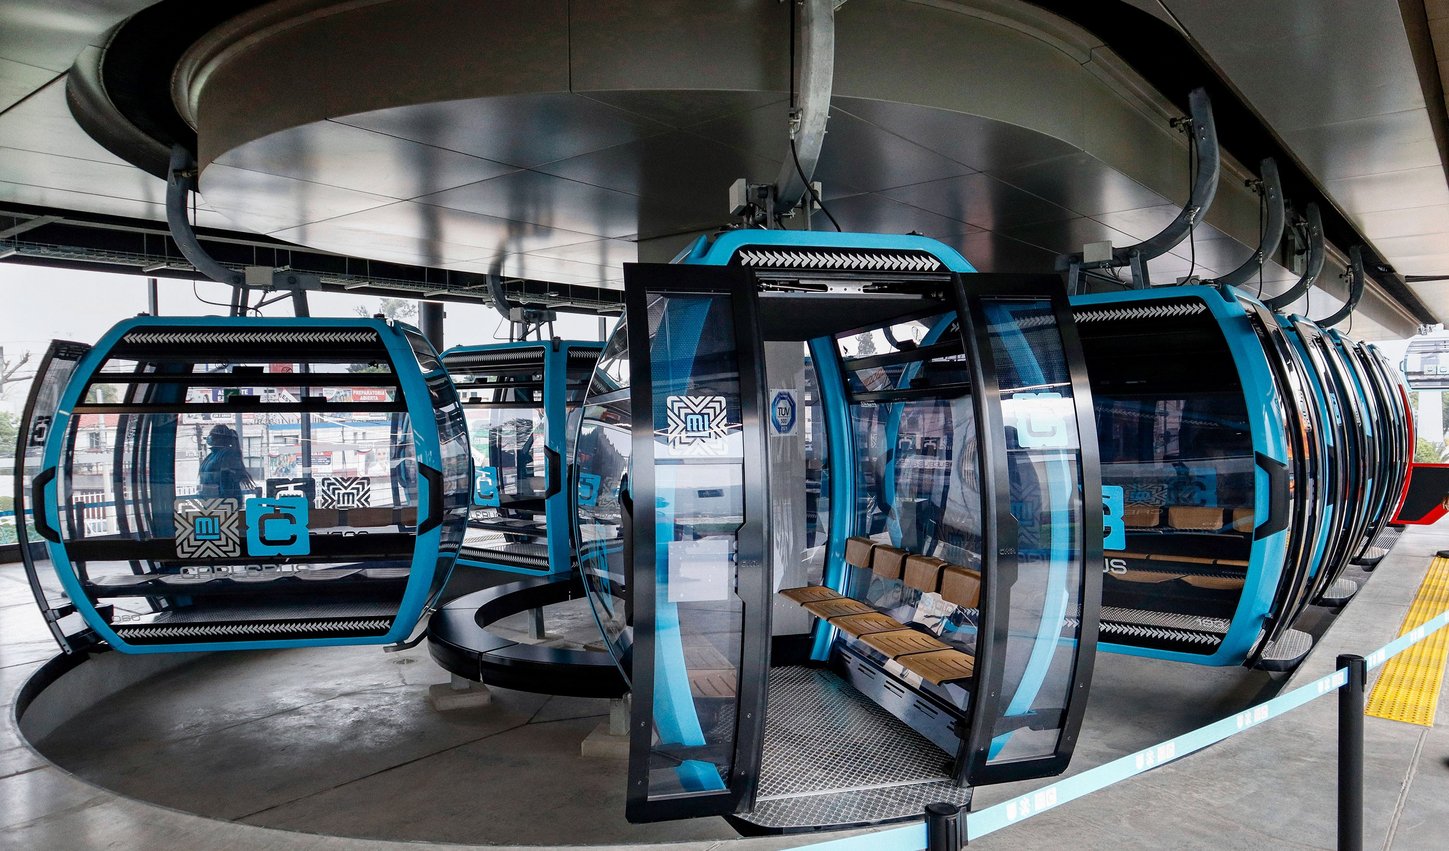 Photo of the entry and exit point of the cable bus. You can see several gondolas in a row, which are empty and whose doors are open.